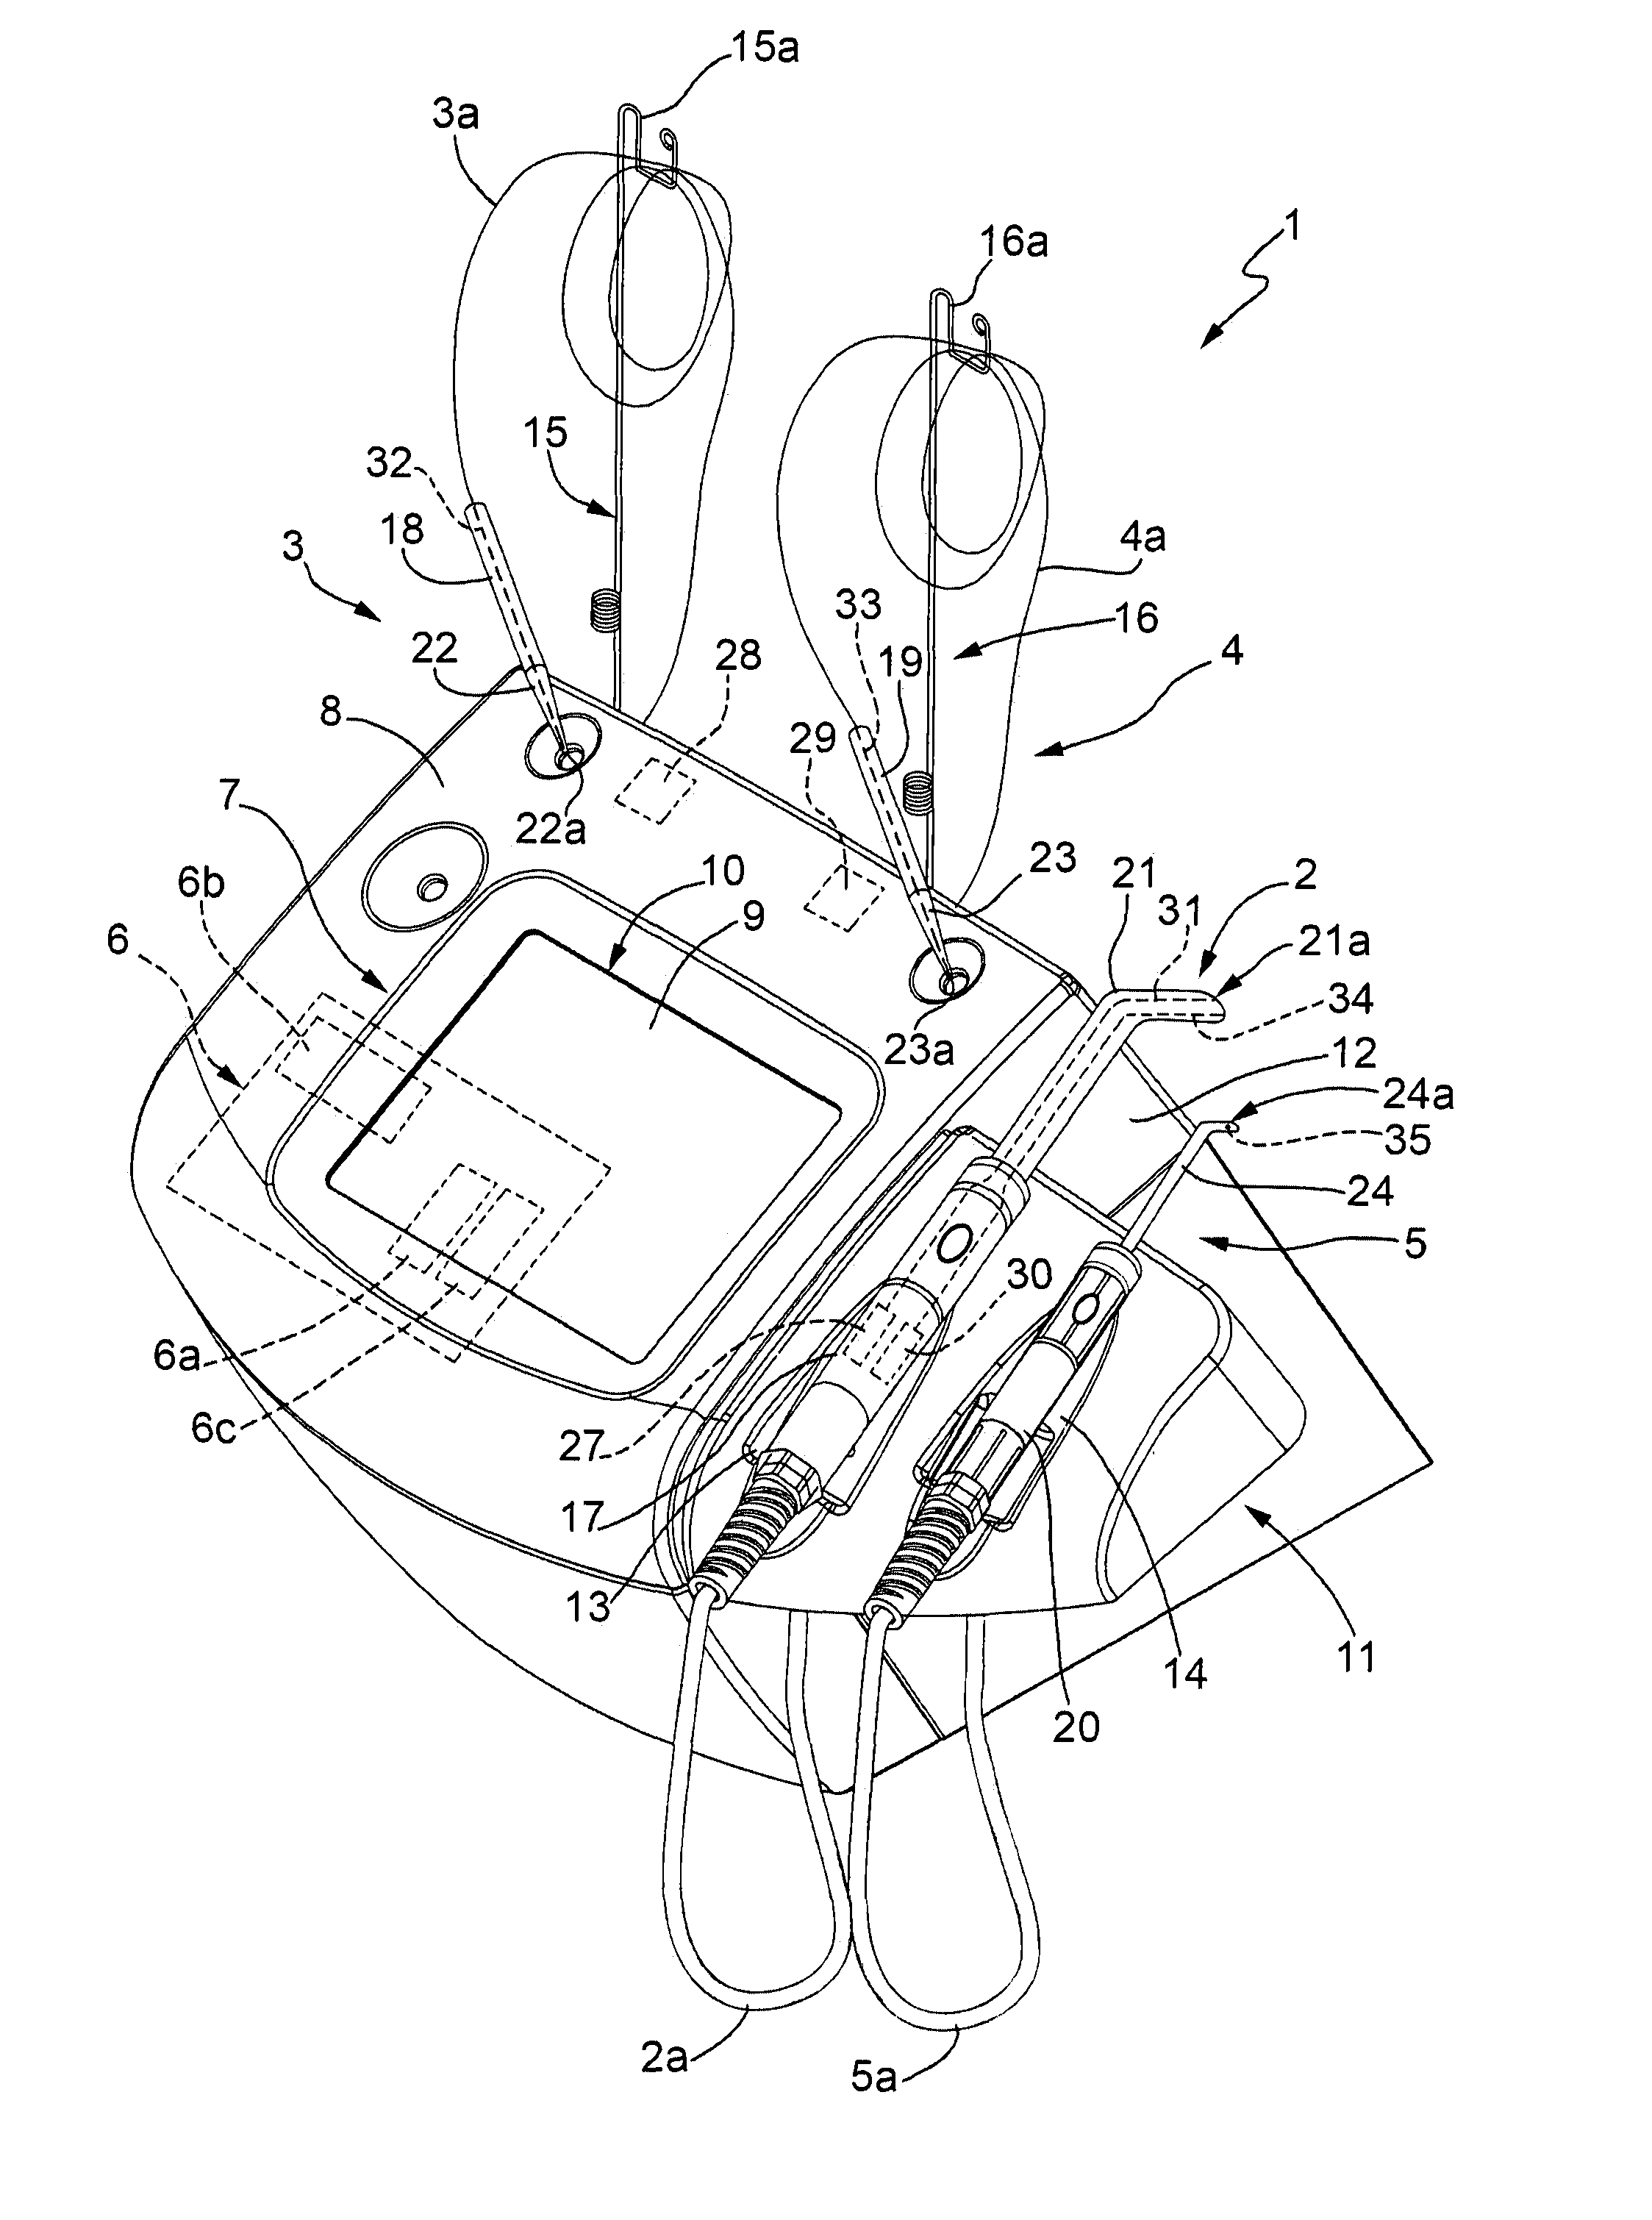 Device for Dentistry Treatments